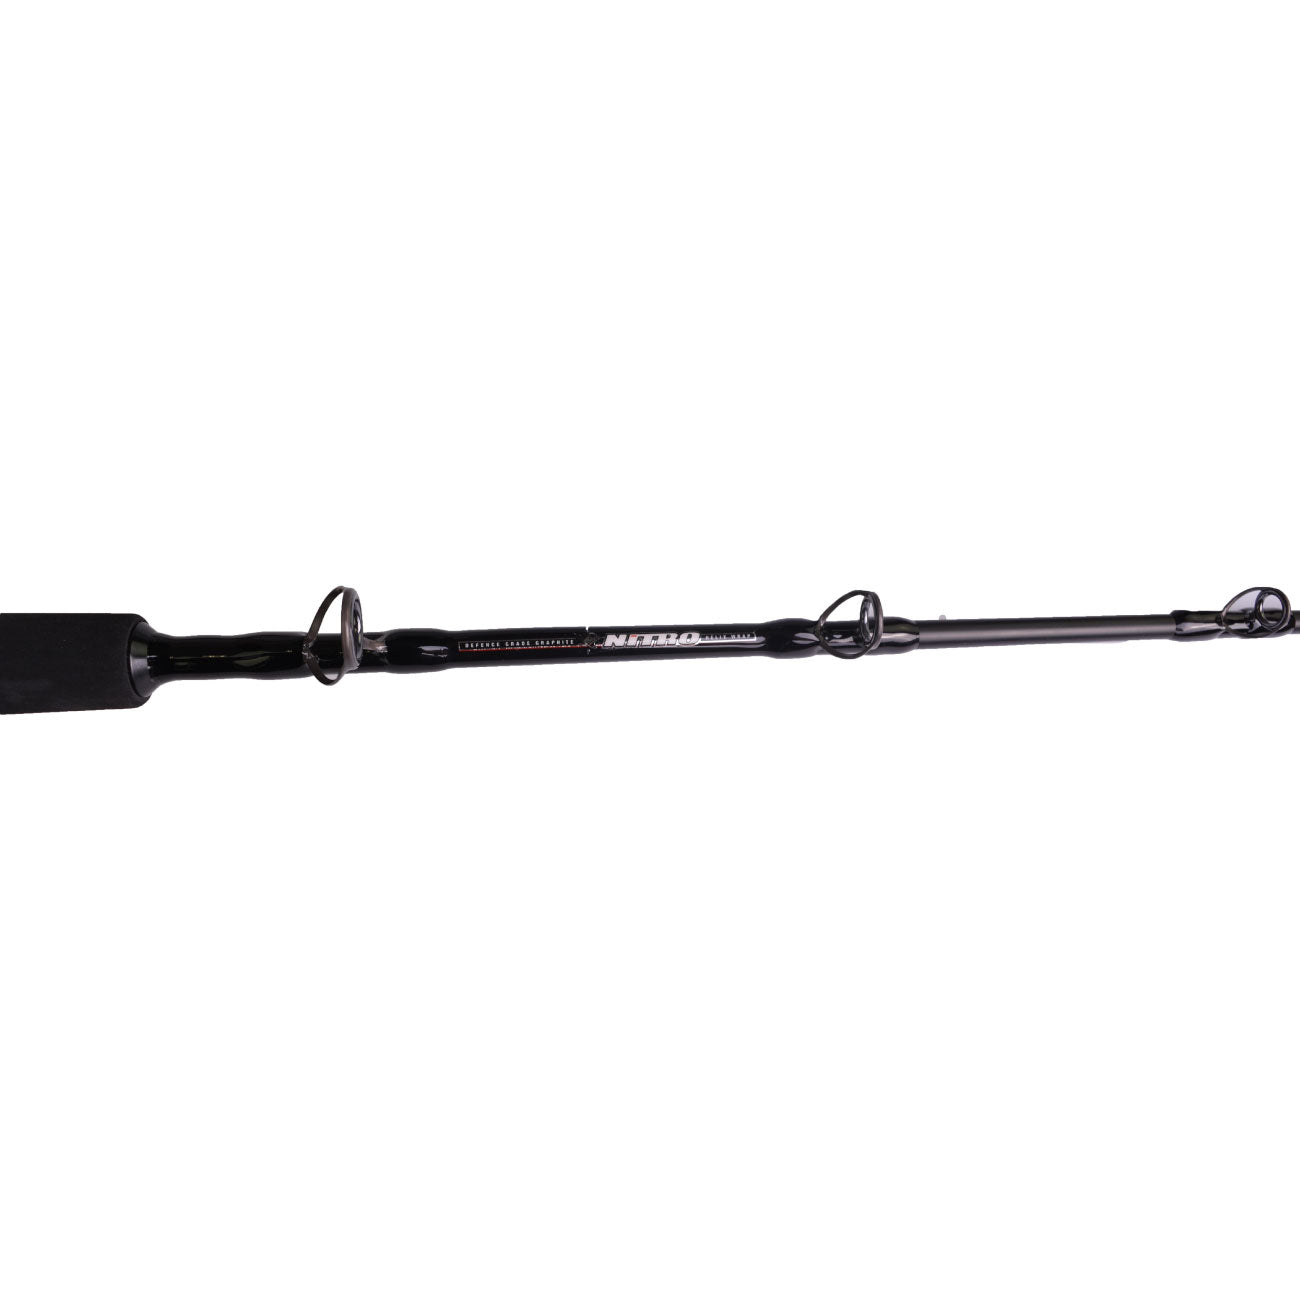 $100 - $200 - Compleat Angler Nedlands Pro Tackle